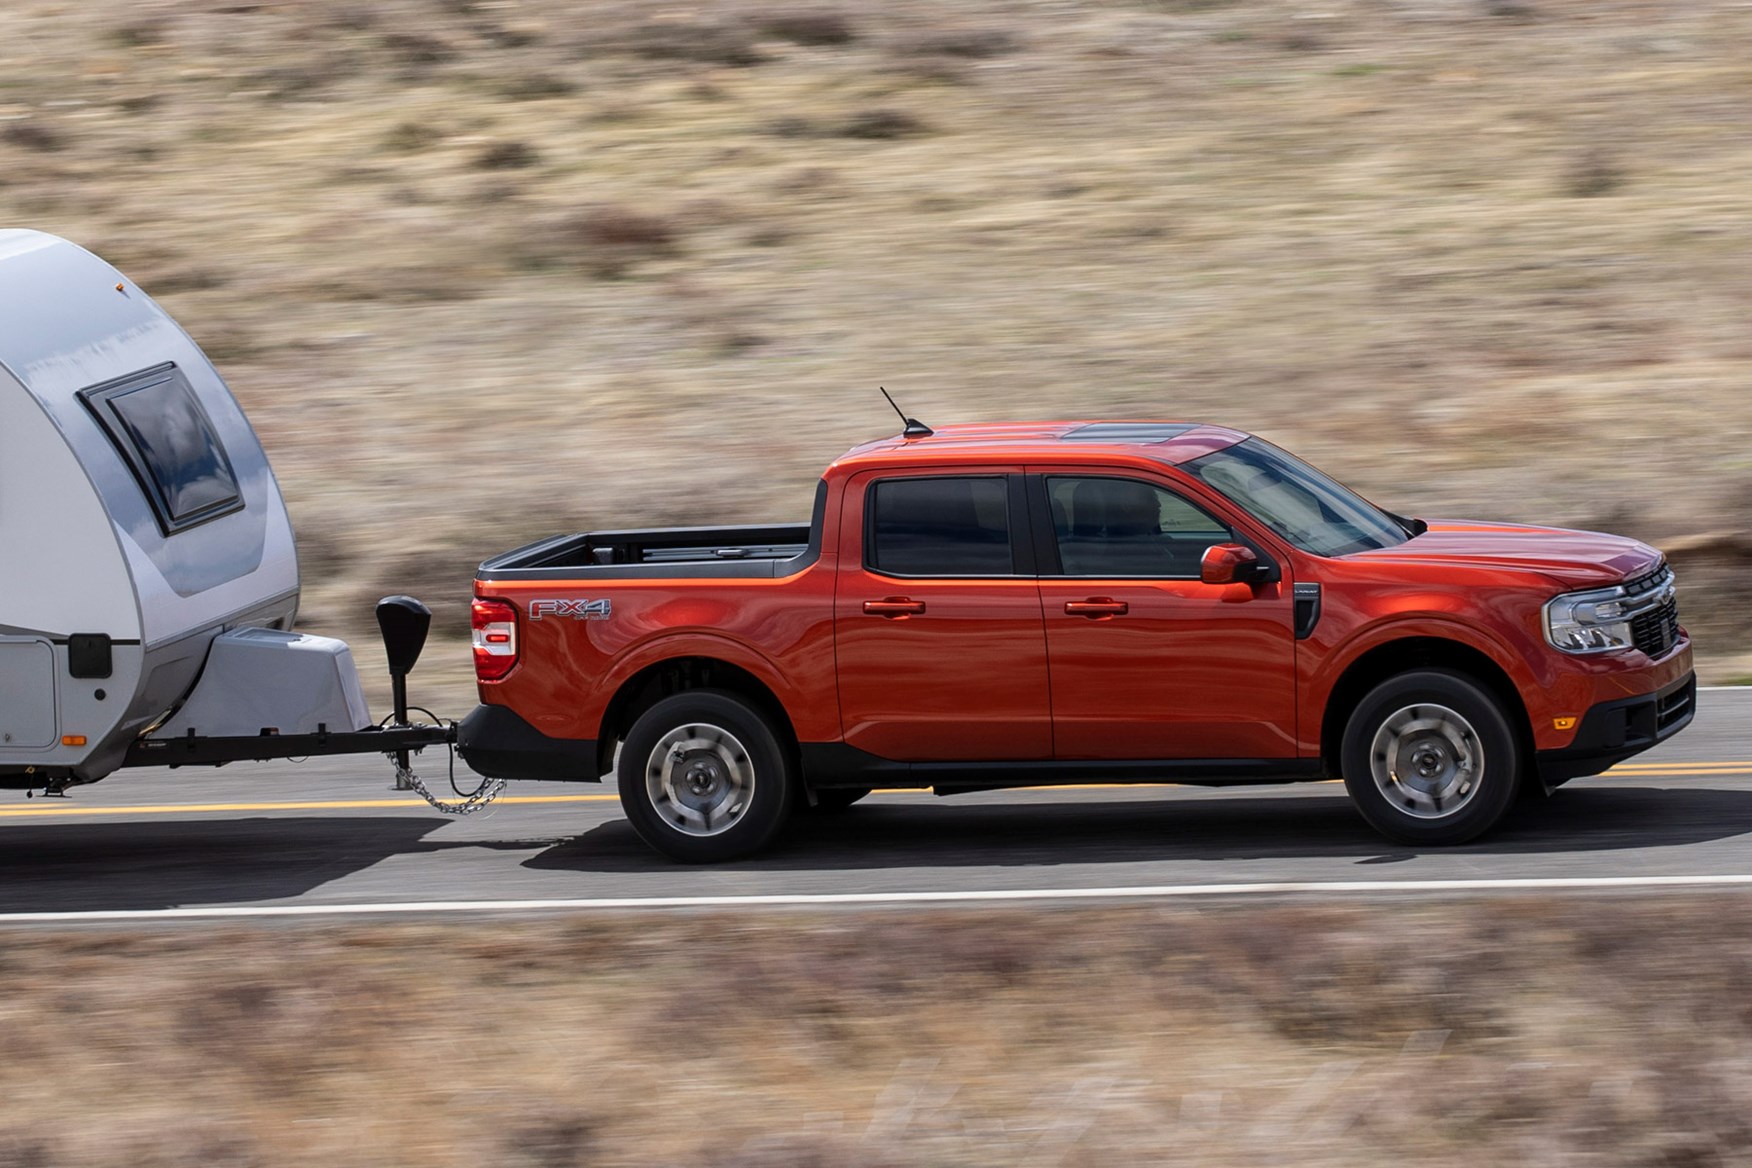 Will the Ford Maverick pickup truck be sold in the UK? | Parkers